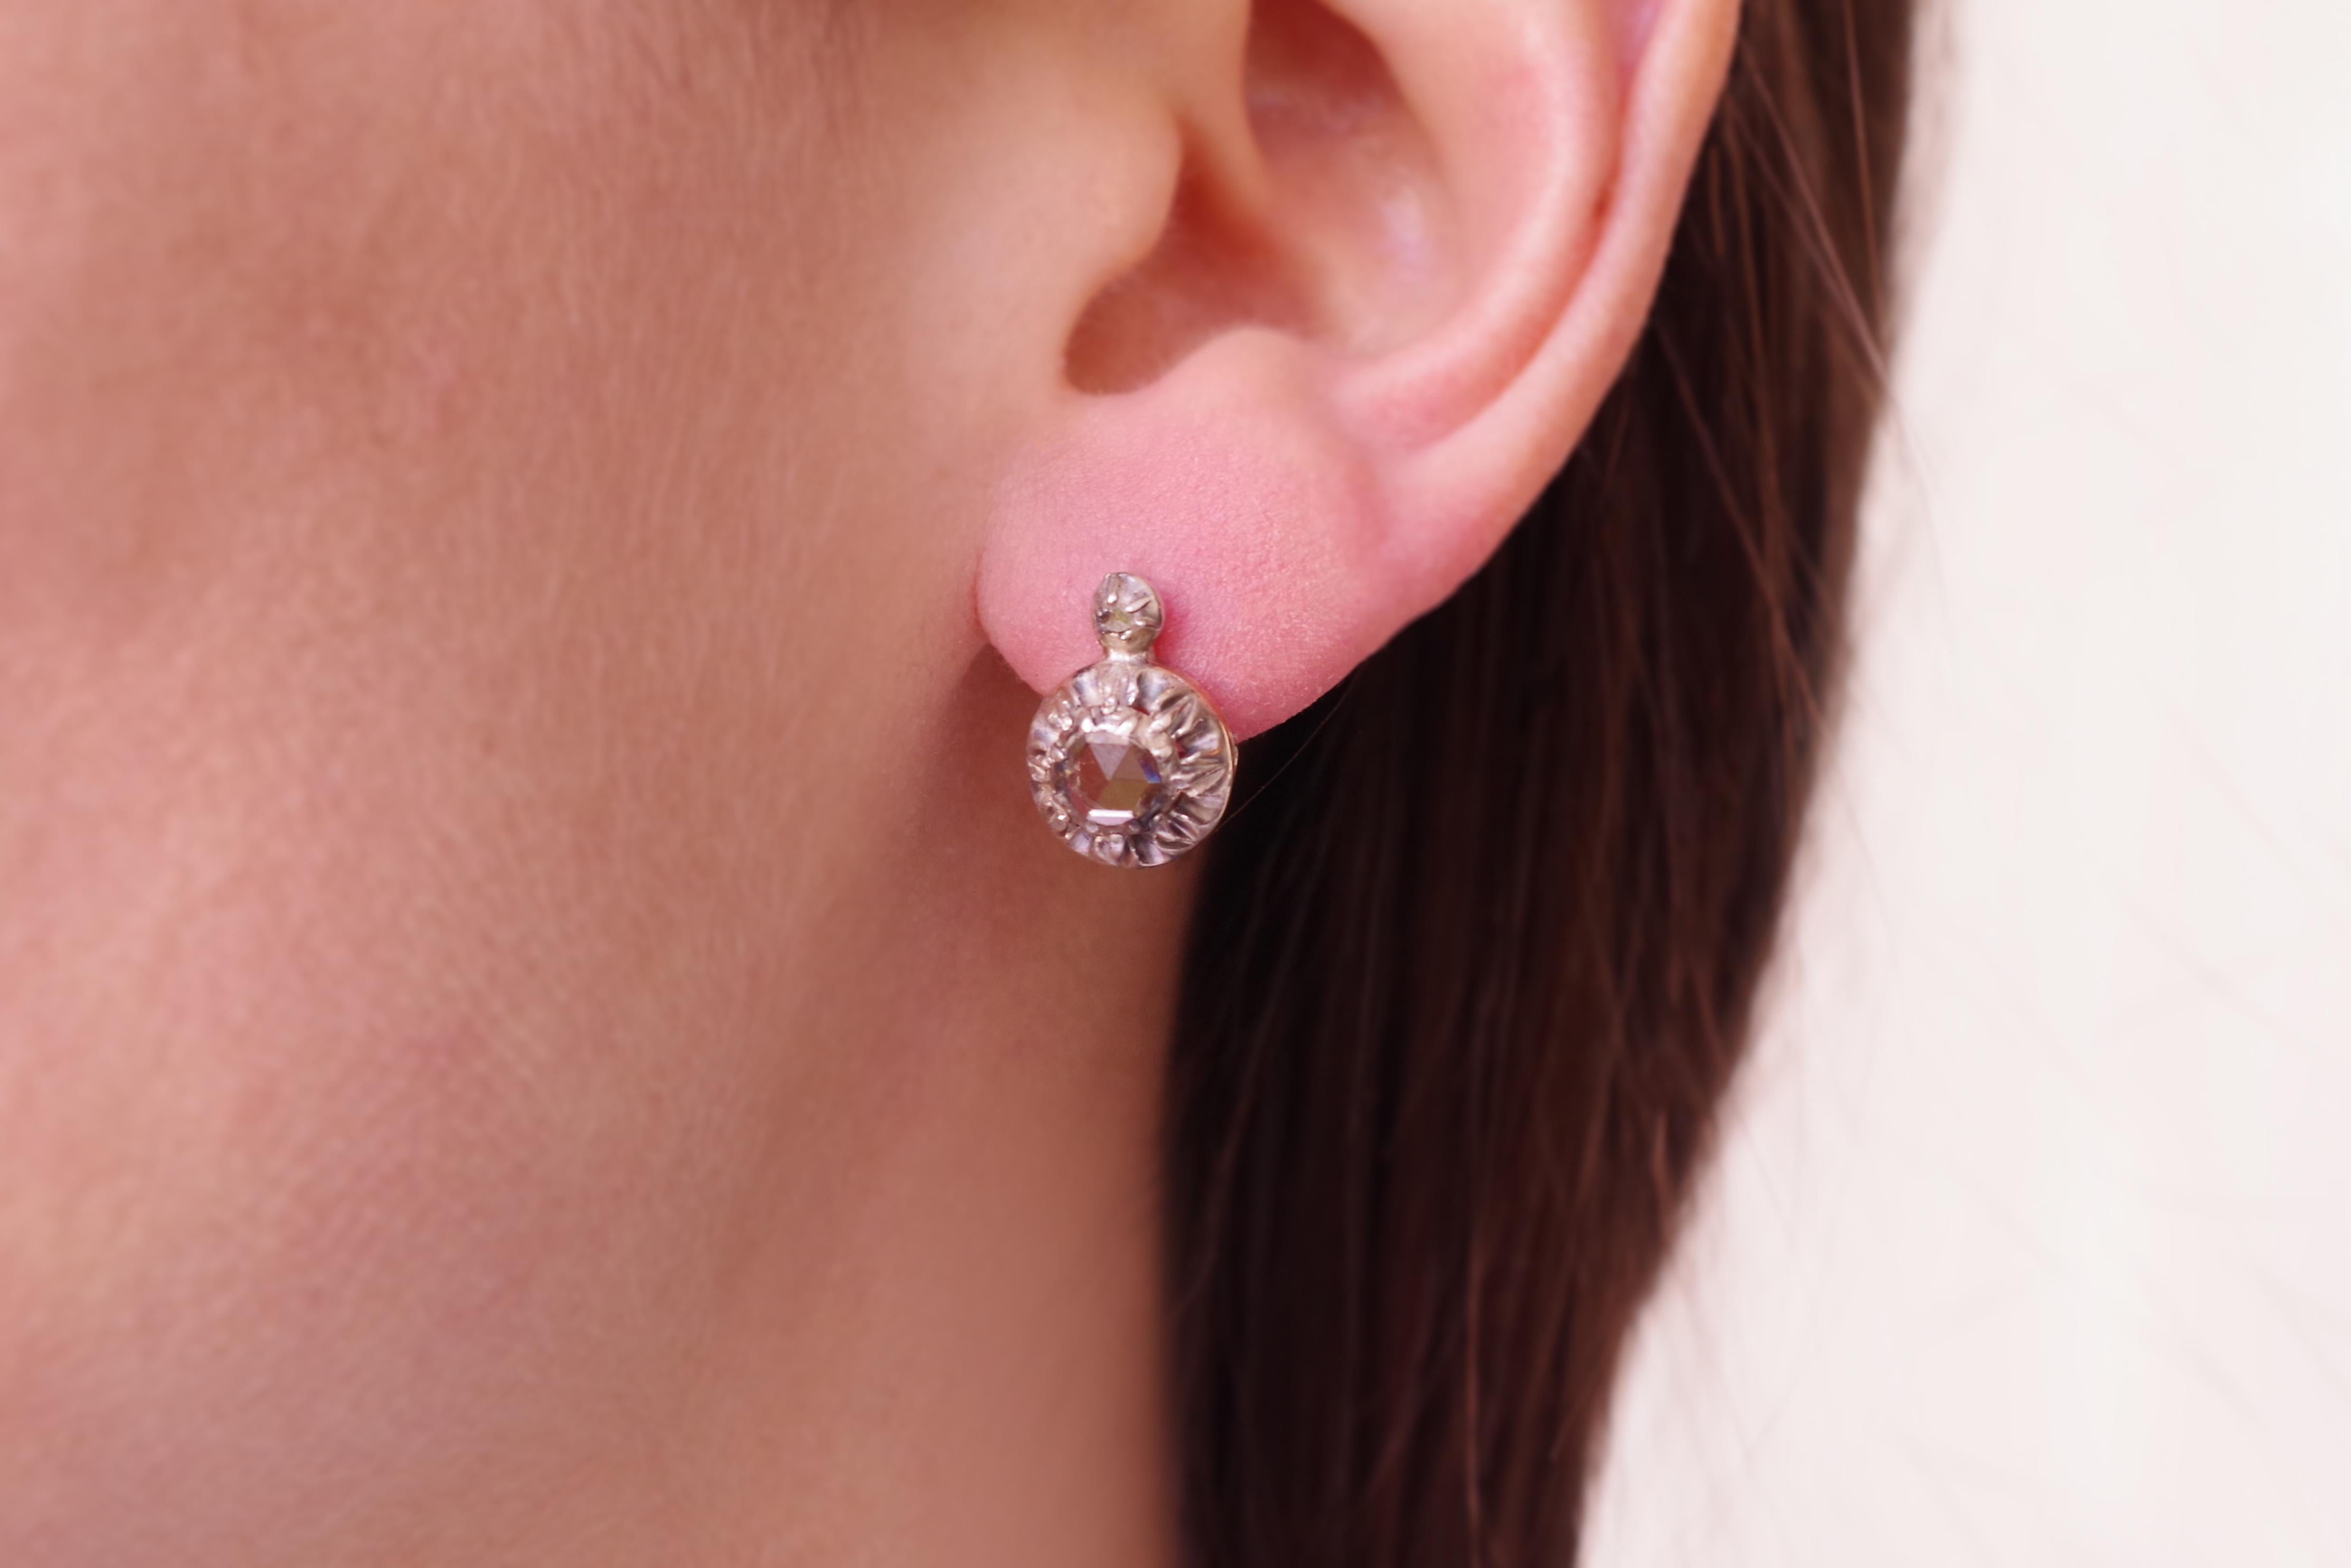 French Georgian Diamond earrings sleepers made of 18 karat pink gold and silver. Two rose-cut diamonds are bezel-set on a silver settings. Eight little prongs hold the main diamond. The back of the sleeper is in rose gold. Jewel from the beginning